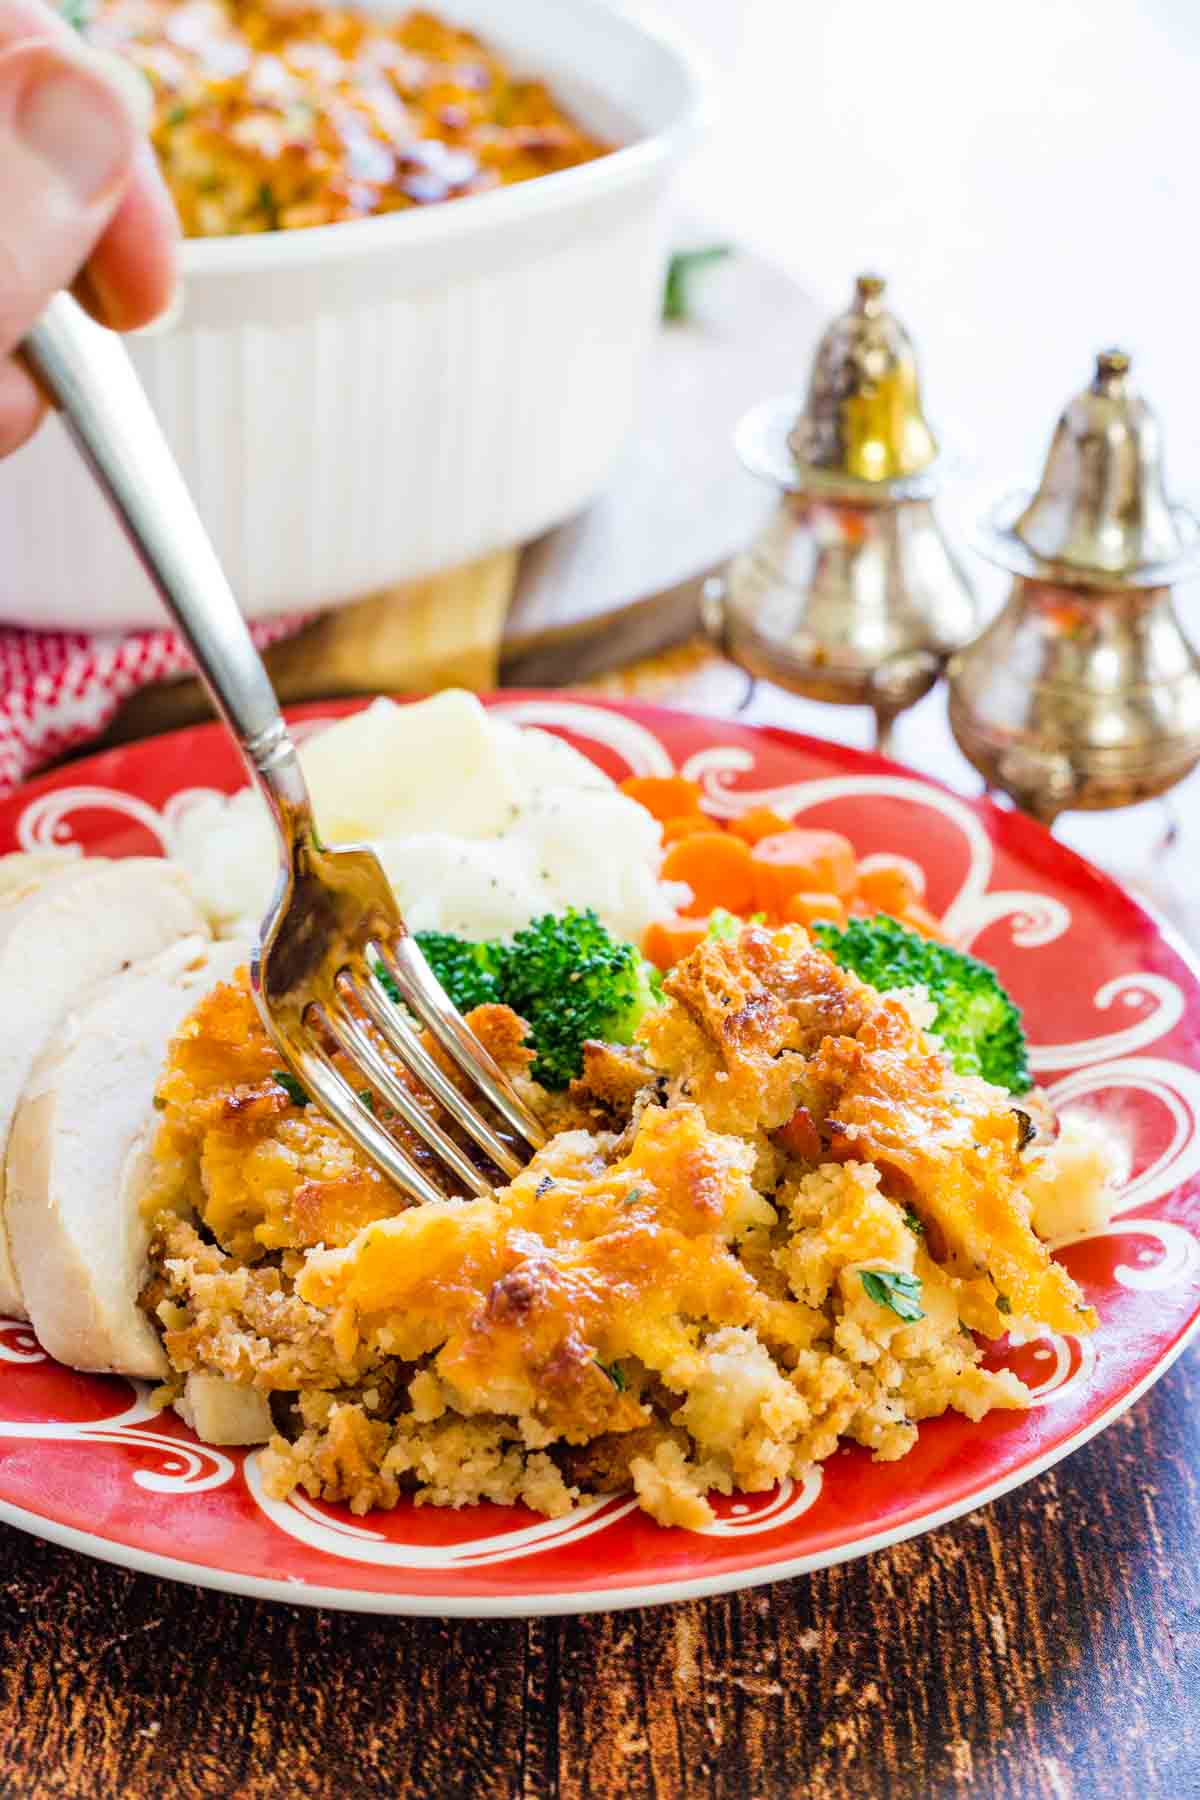 A fork dips into a plate of gluten free apple stuffing and turkey.